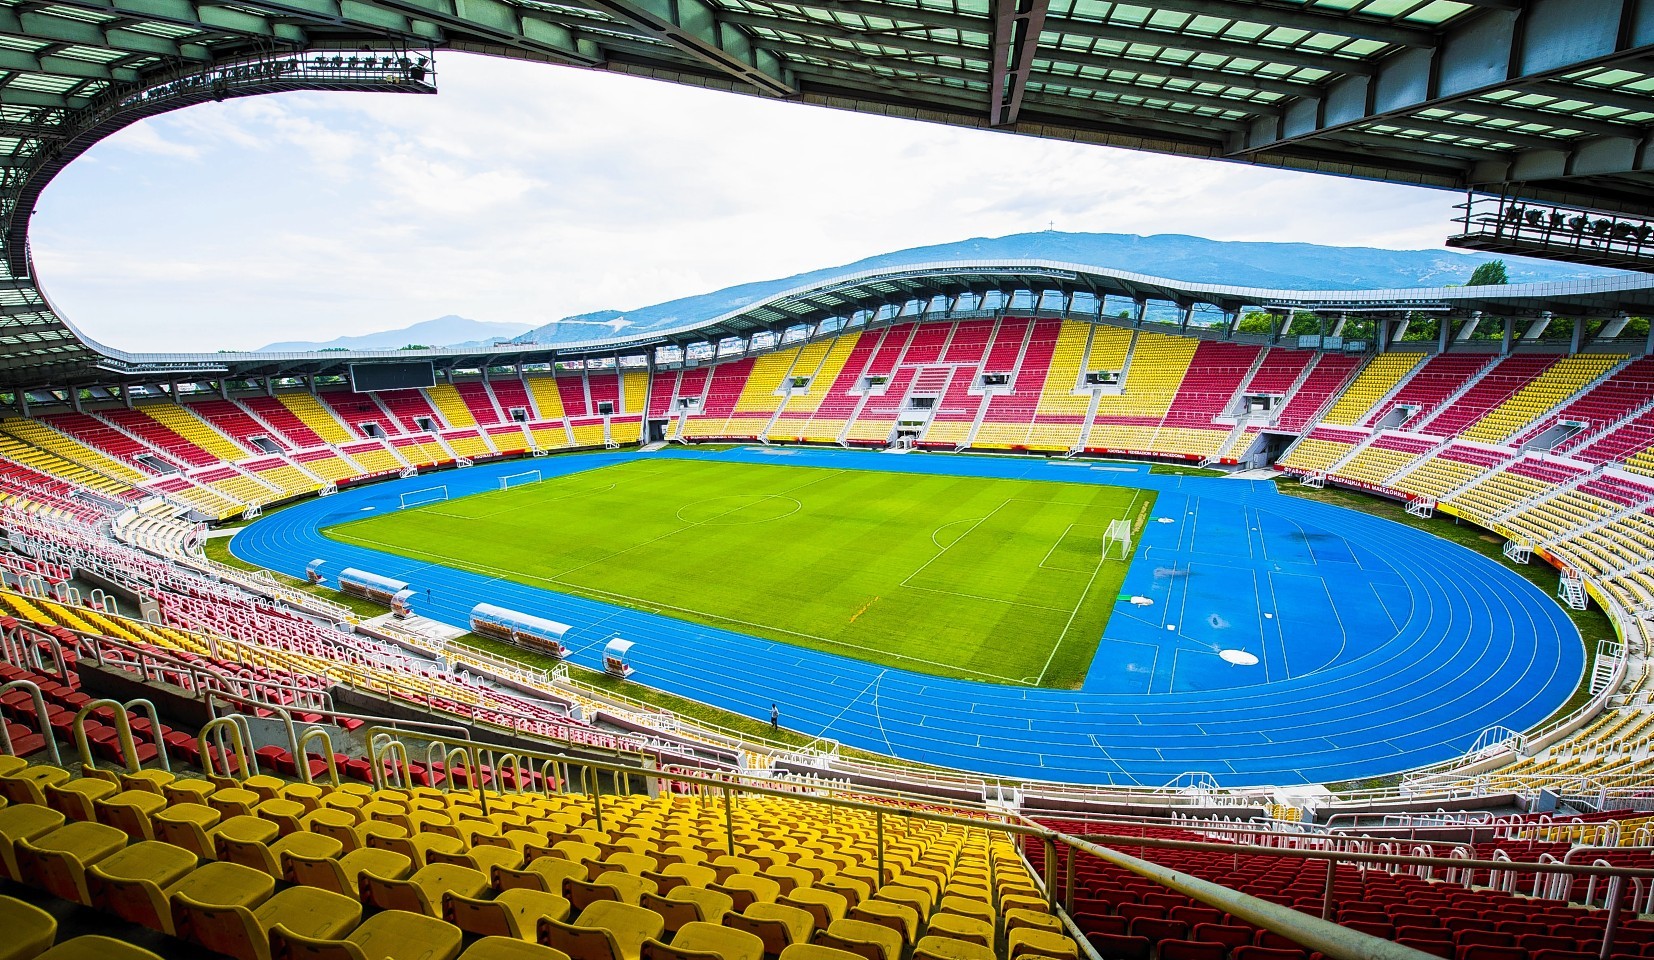 The game will take place at the Philip II Arena in Skopje